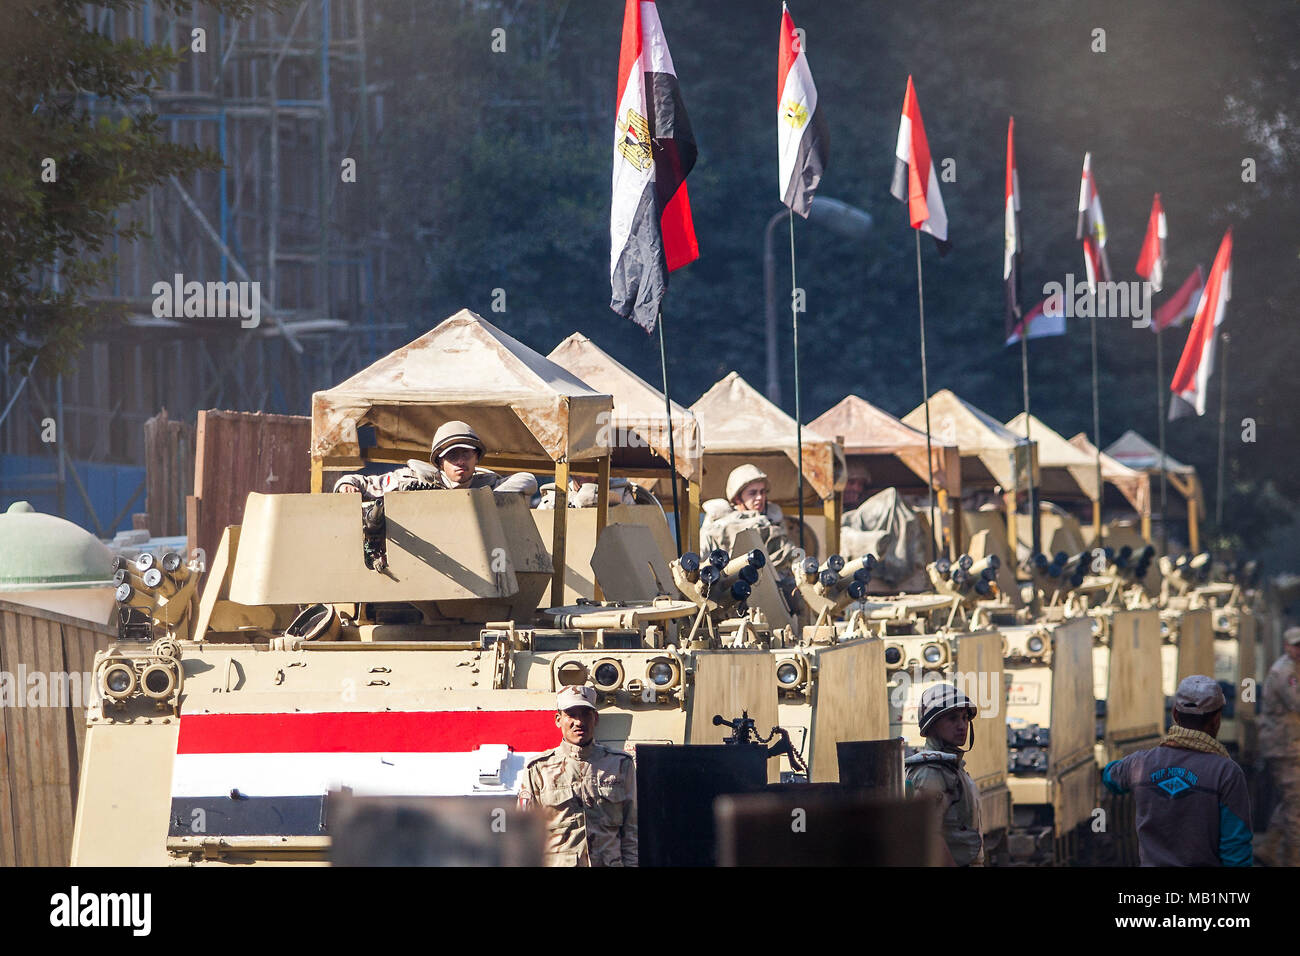 Cairo, Egypt - 29/12/2014: Soldiers in the city on duty Stock Photo